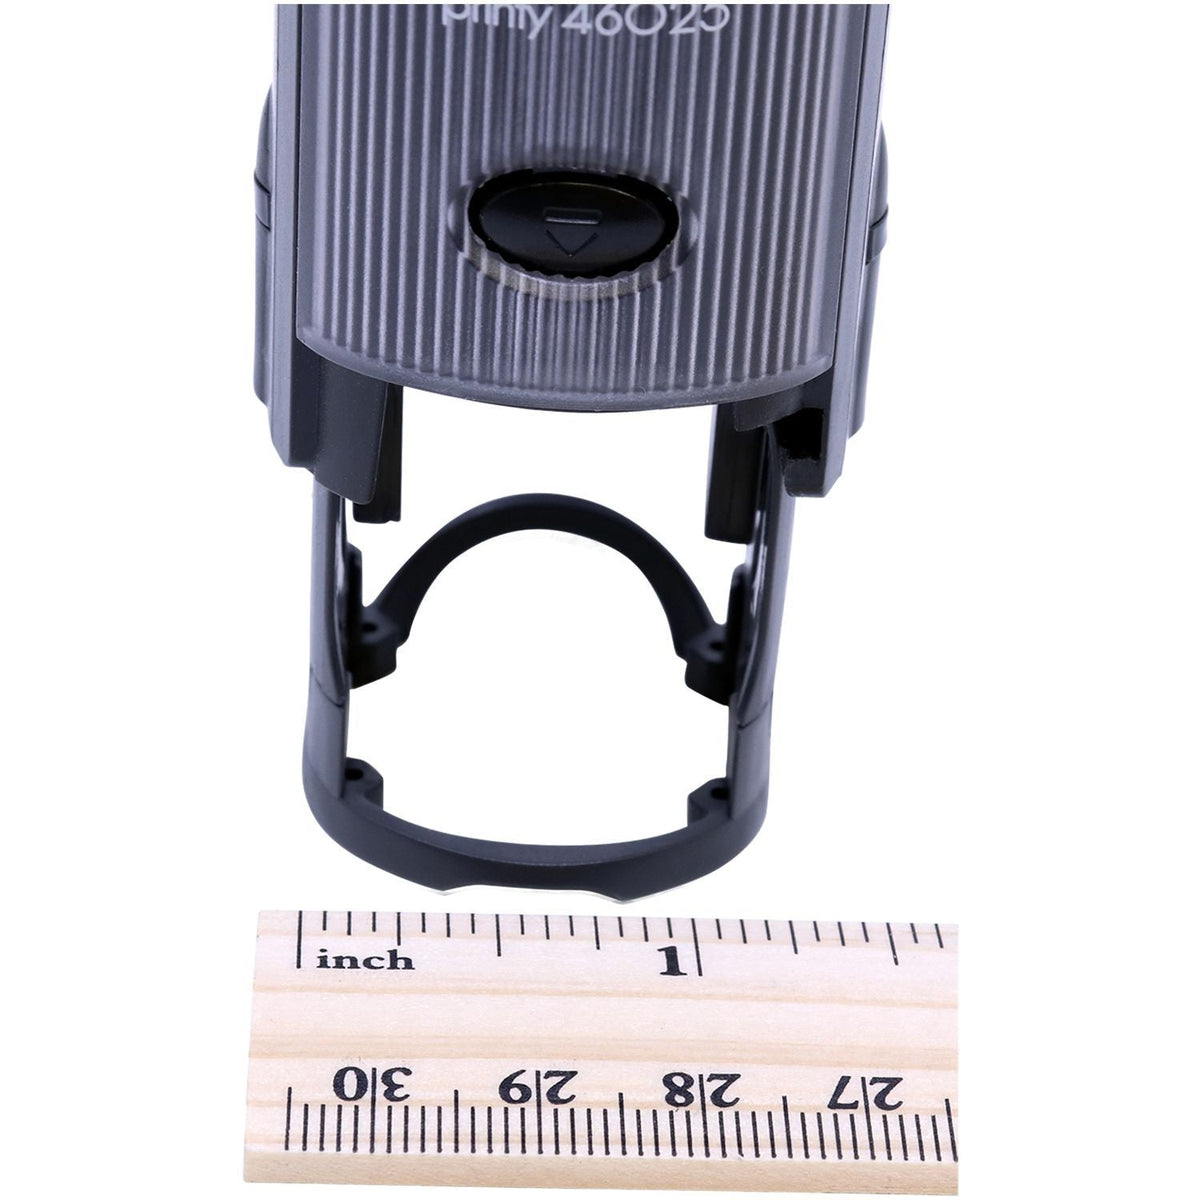 Measurment of Self-Inking Round Brilliant Stamp with Ruler